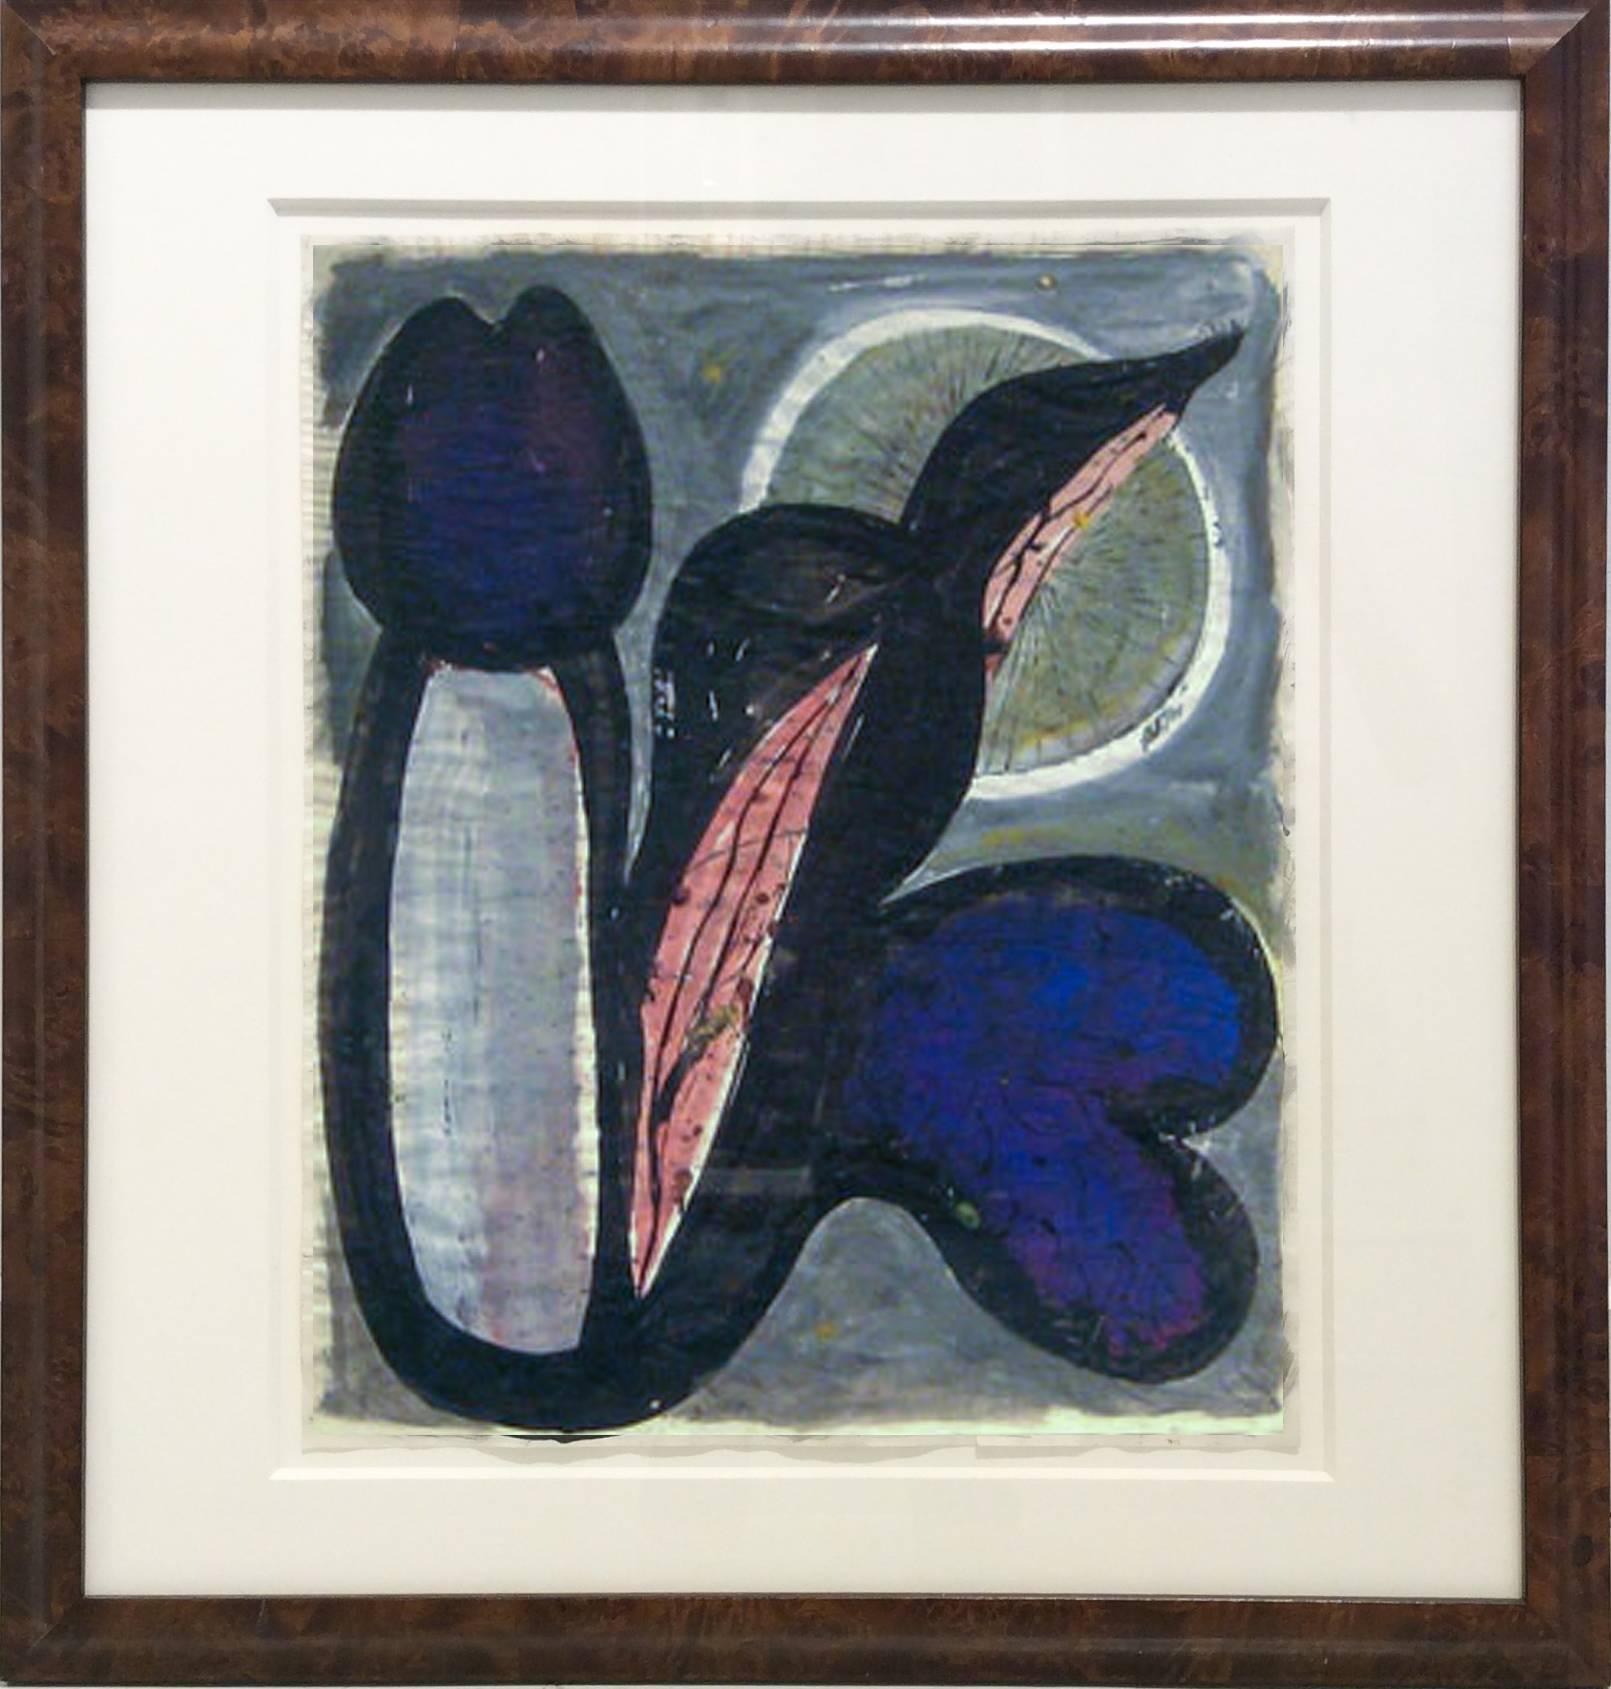 gouache on paper
17 x 14 inches
framed size is 23.5 x 22 x 1 inches
Dark Brown wood burl molding, 8 ply mat

This abstract painting on paper was painted by Onni Saari c. 1970. The abstracted phallic shape is defined with dark hues of grey, purple,